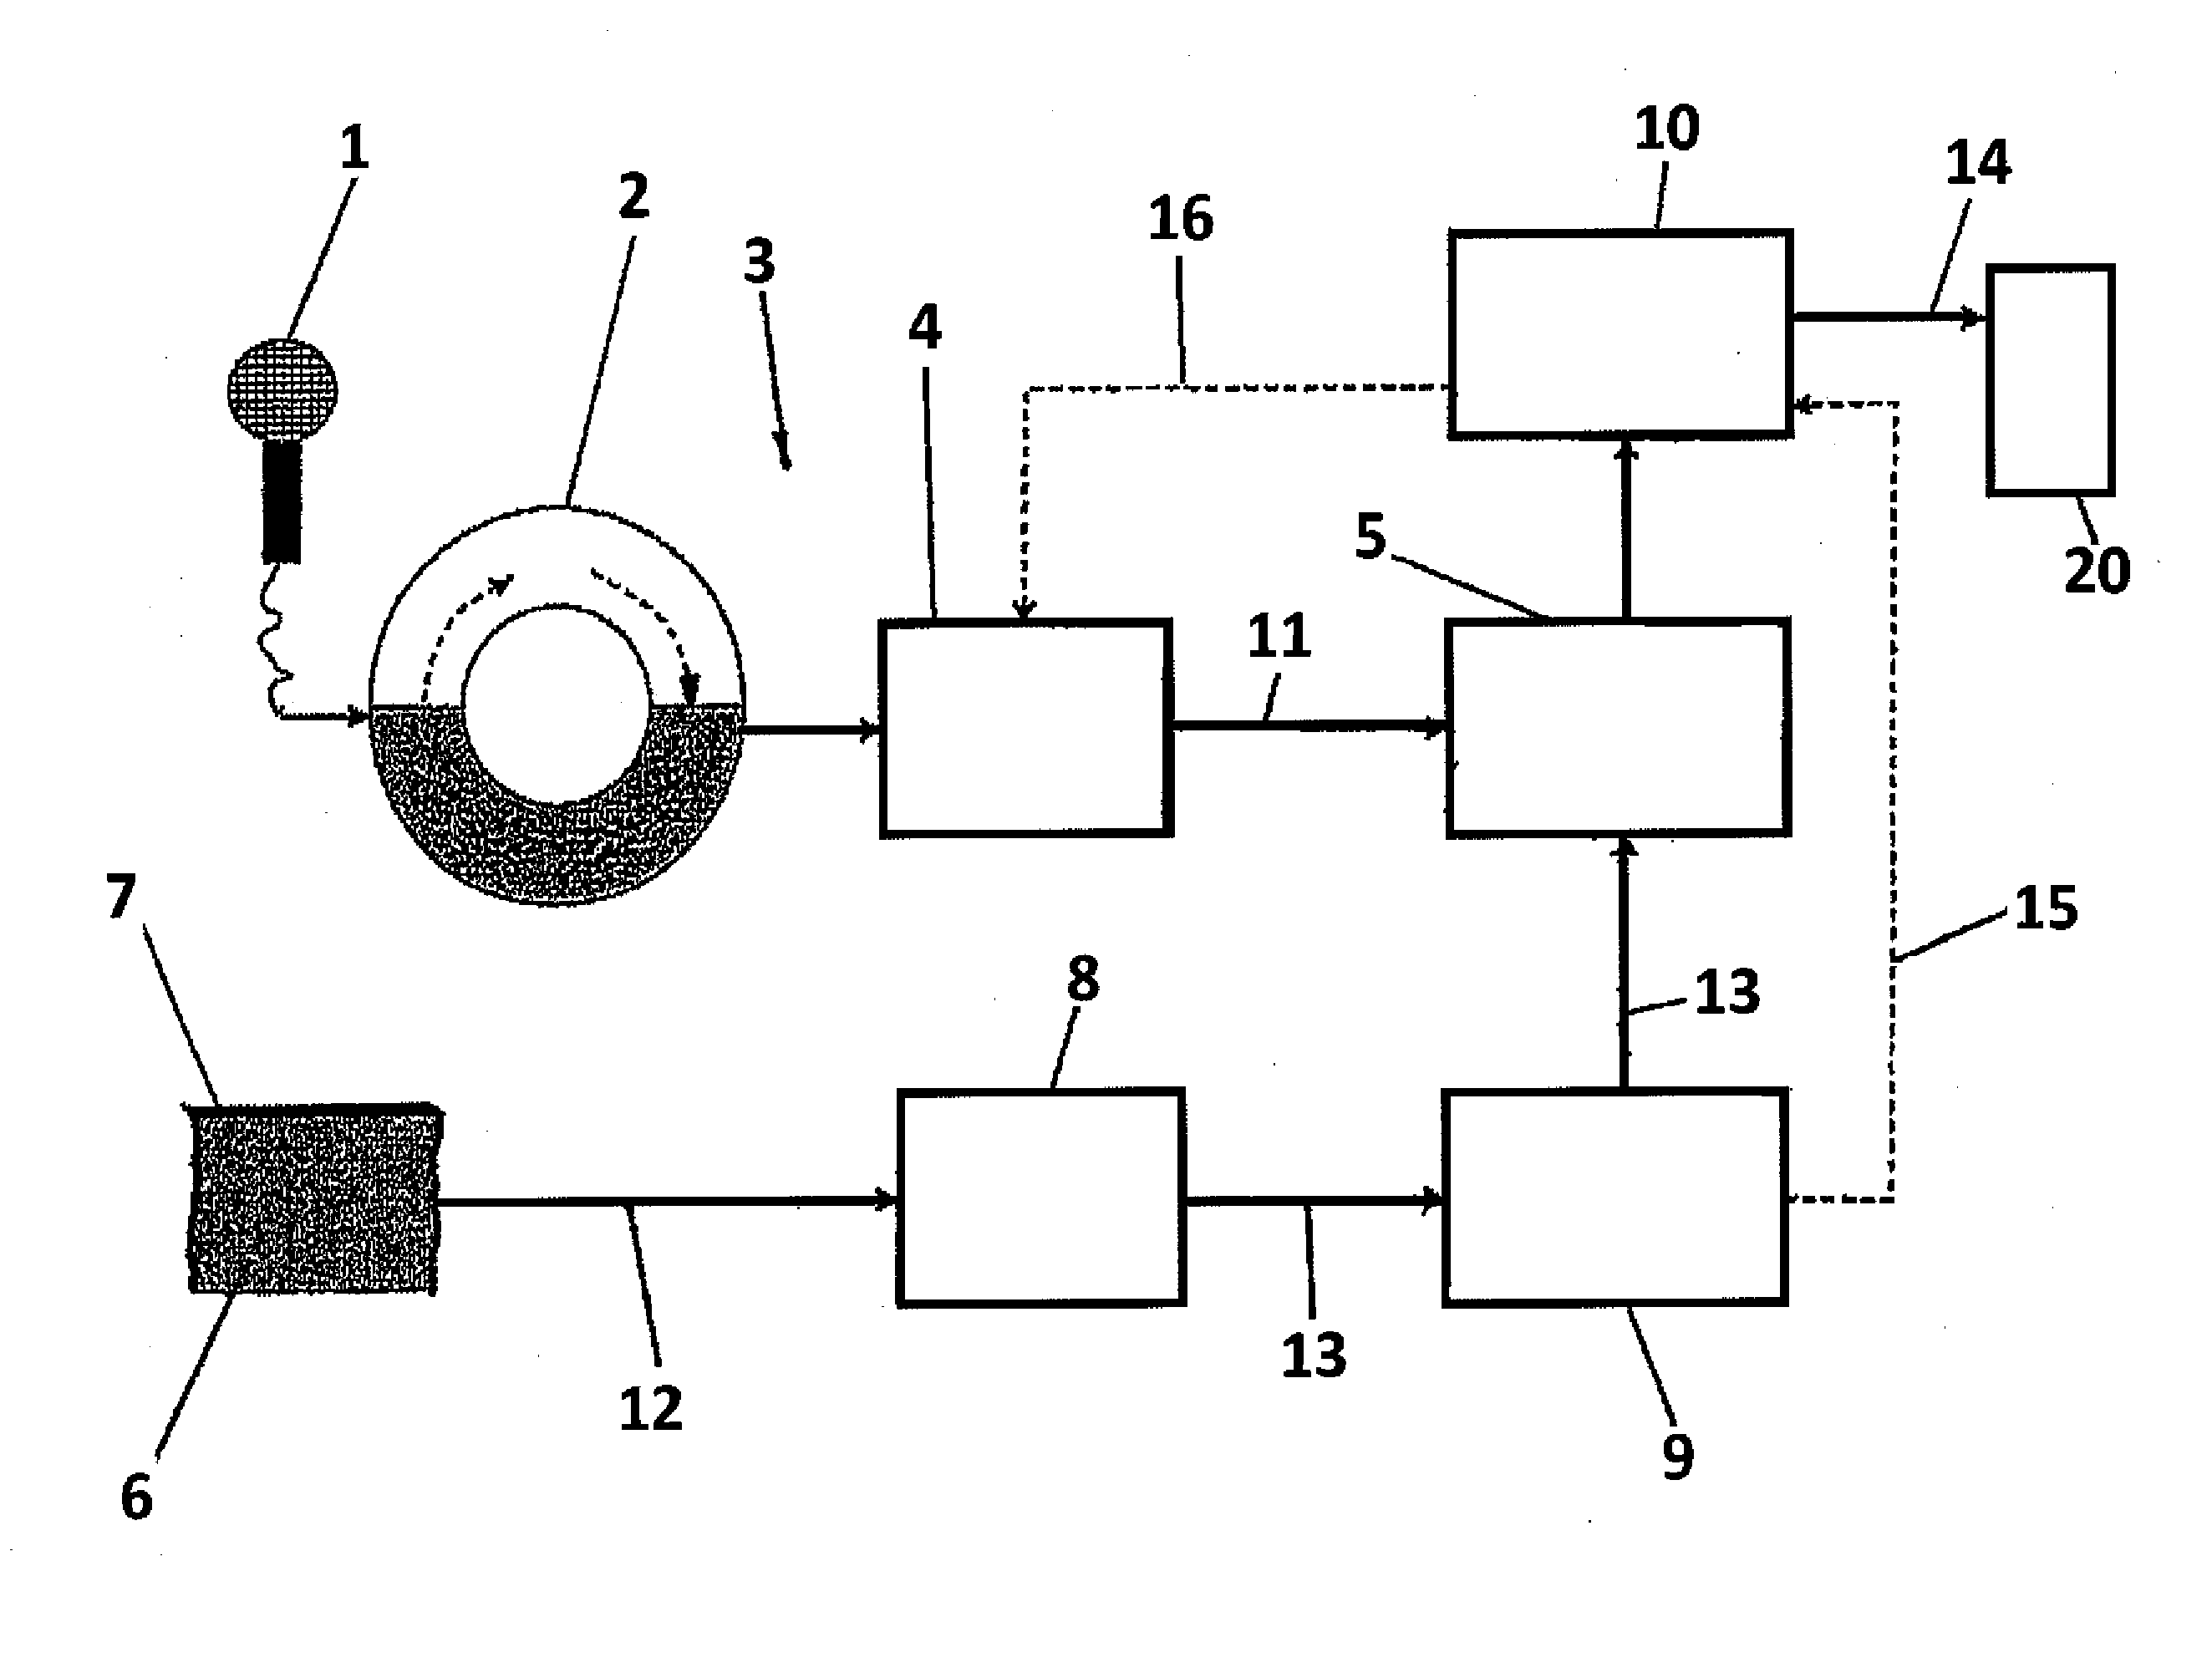 Method and device for operating technical equipment, in particular a motor vehicle